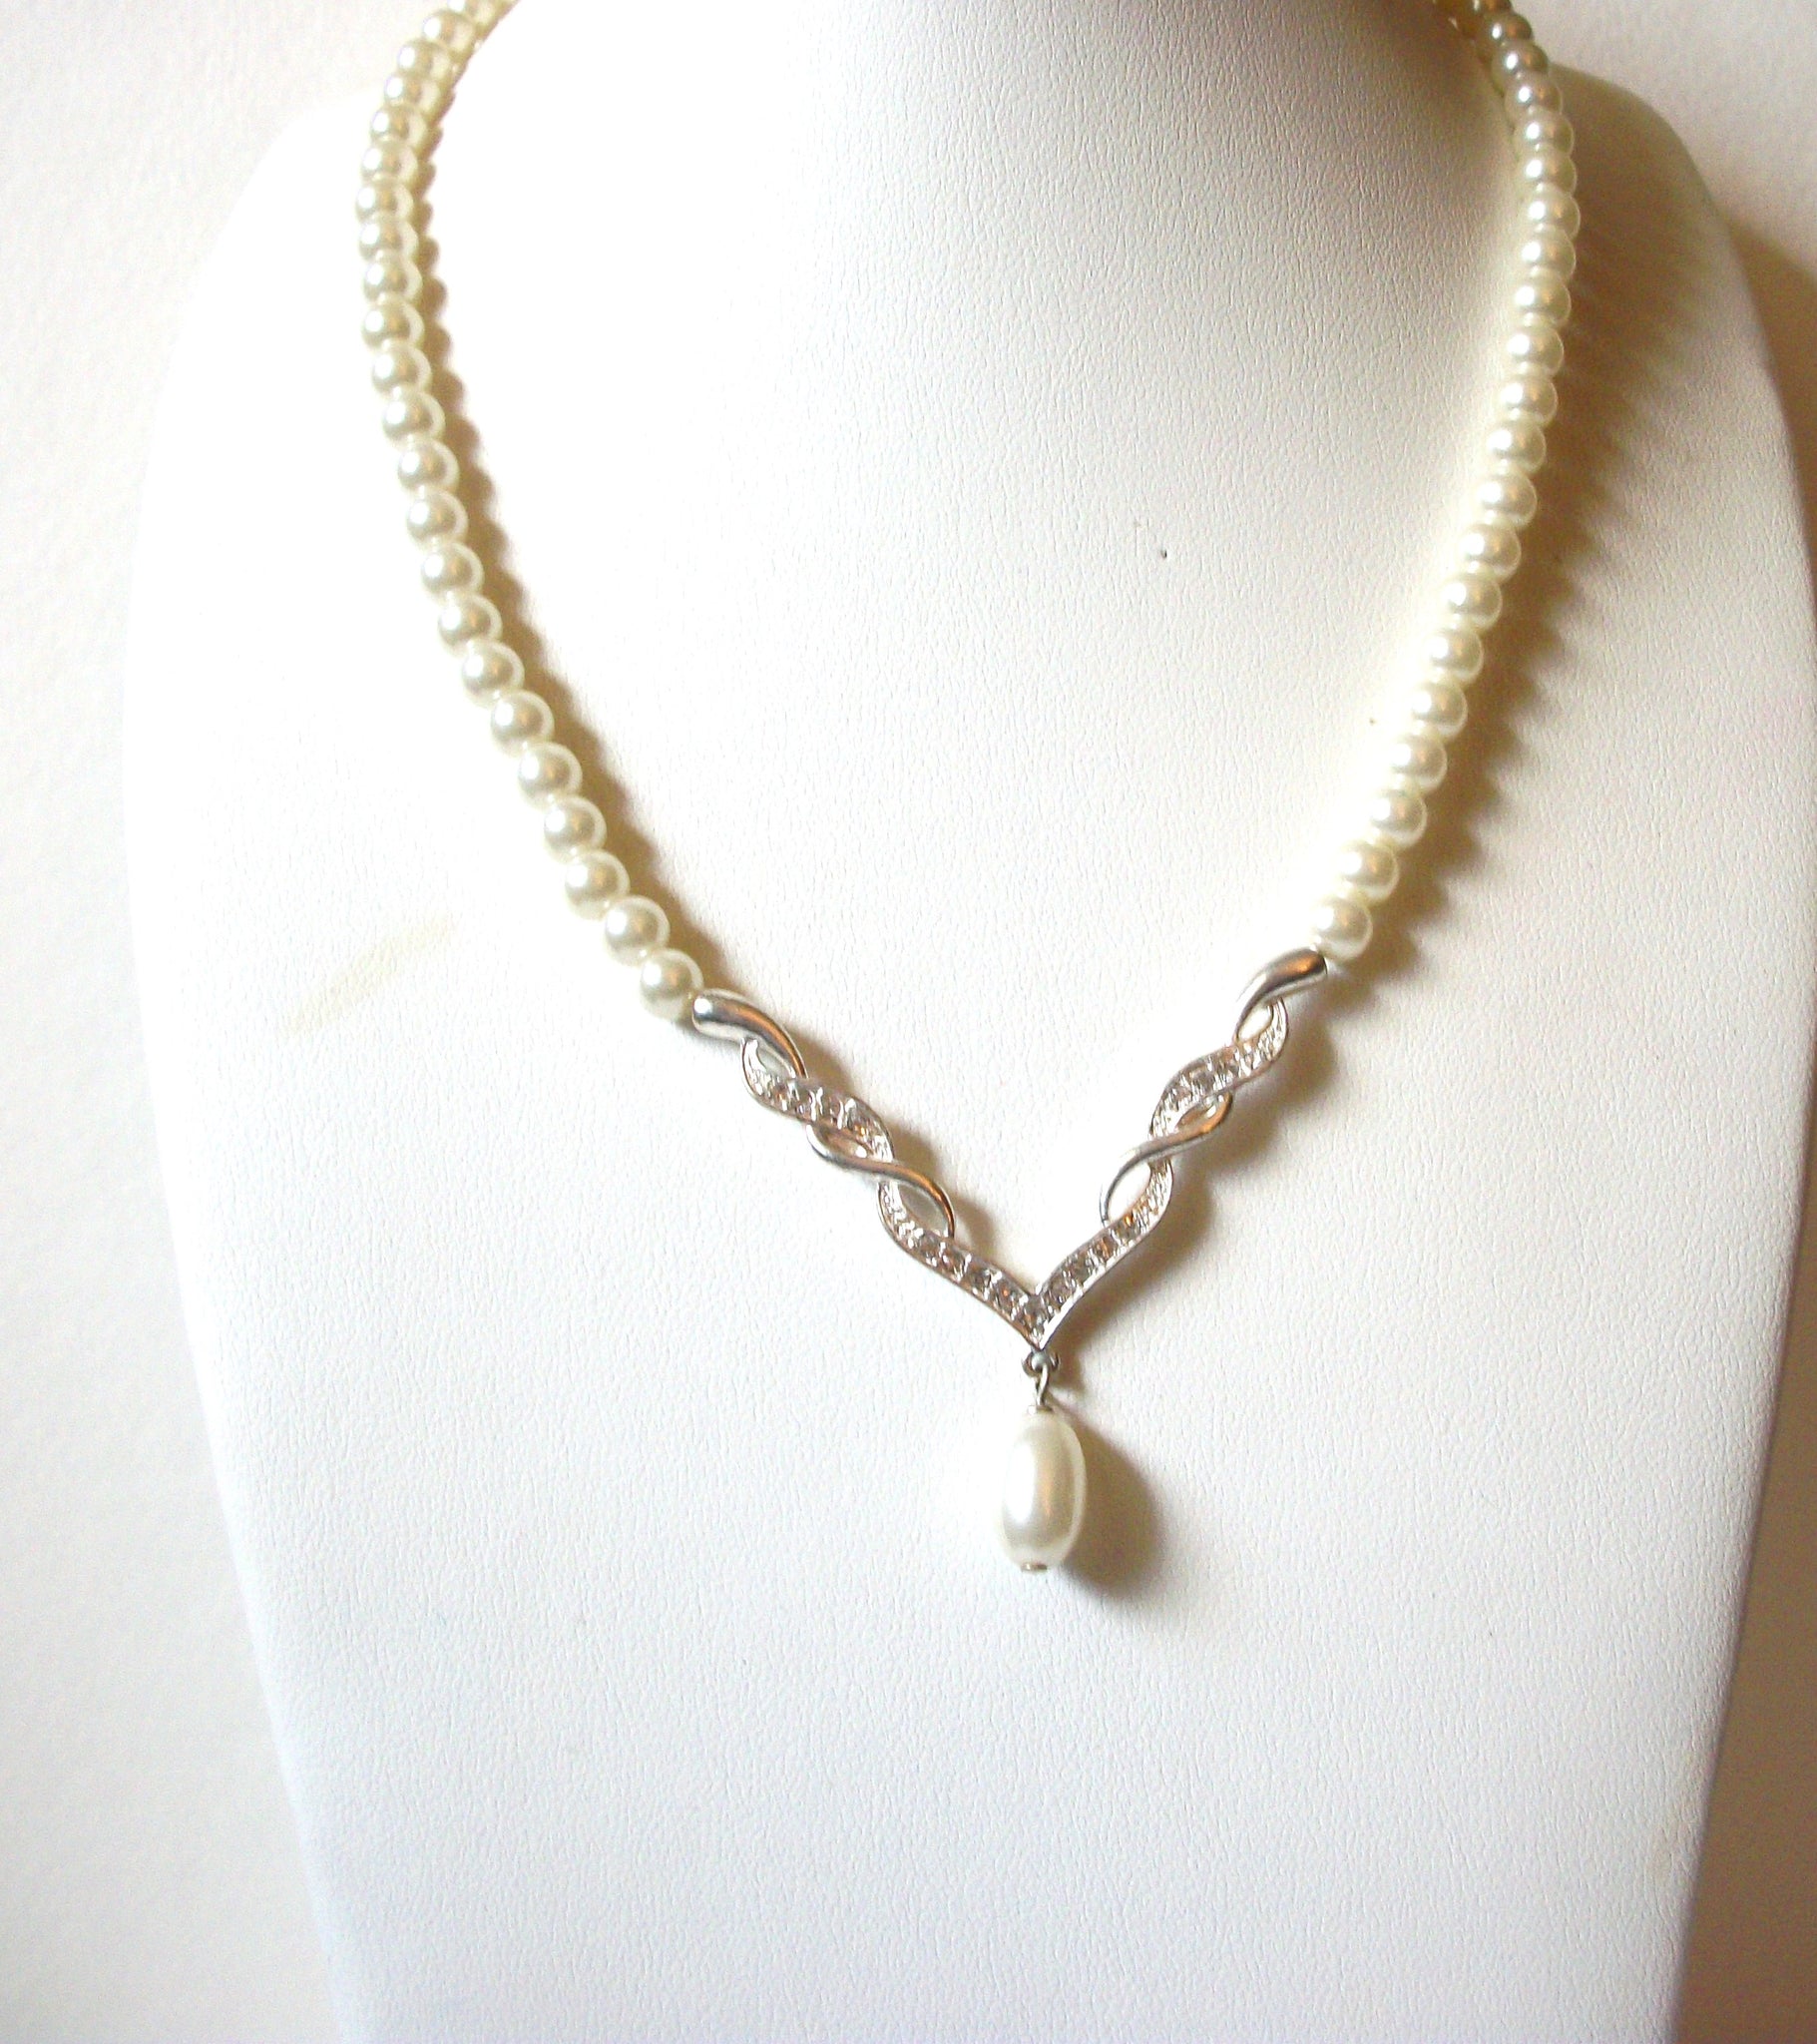 Avon Necklace With 3 Heart Shaped Pearls Gold Chain New | eBay